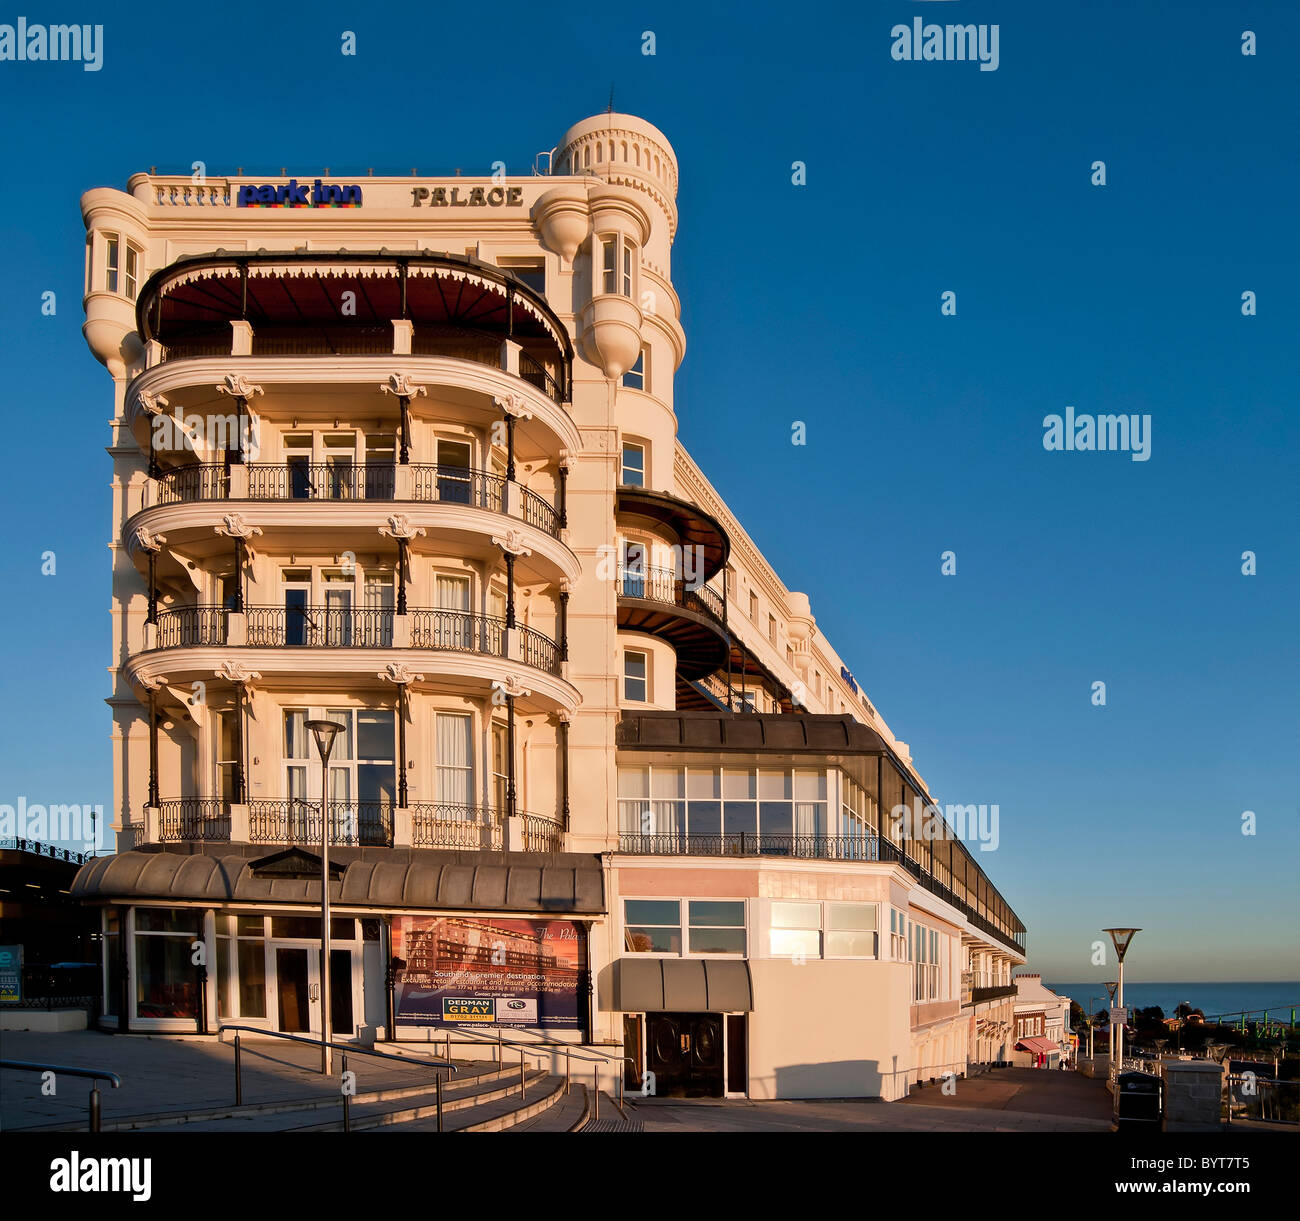 SOUTHEND-ON-SEA, ESSEX, UK - JANUARY 09, 2011:  Exterior view of Palace Hotel on Pier Hill Stock Photo